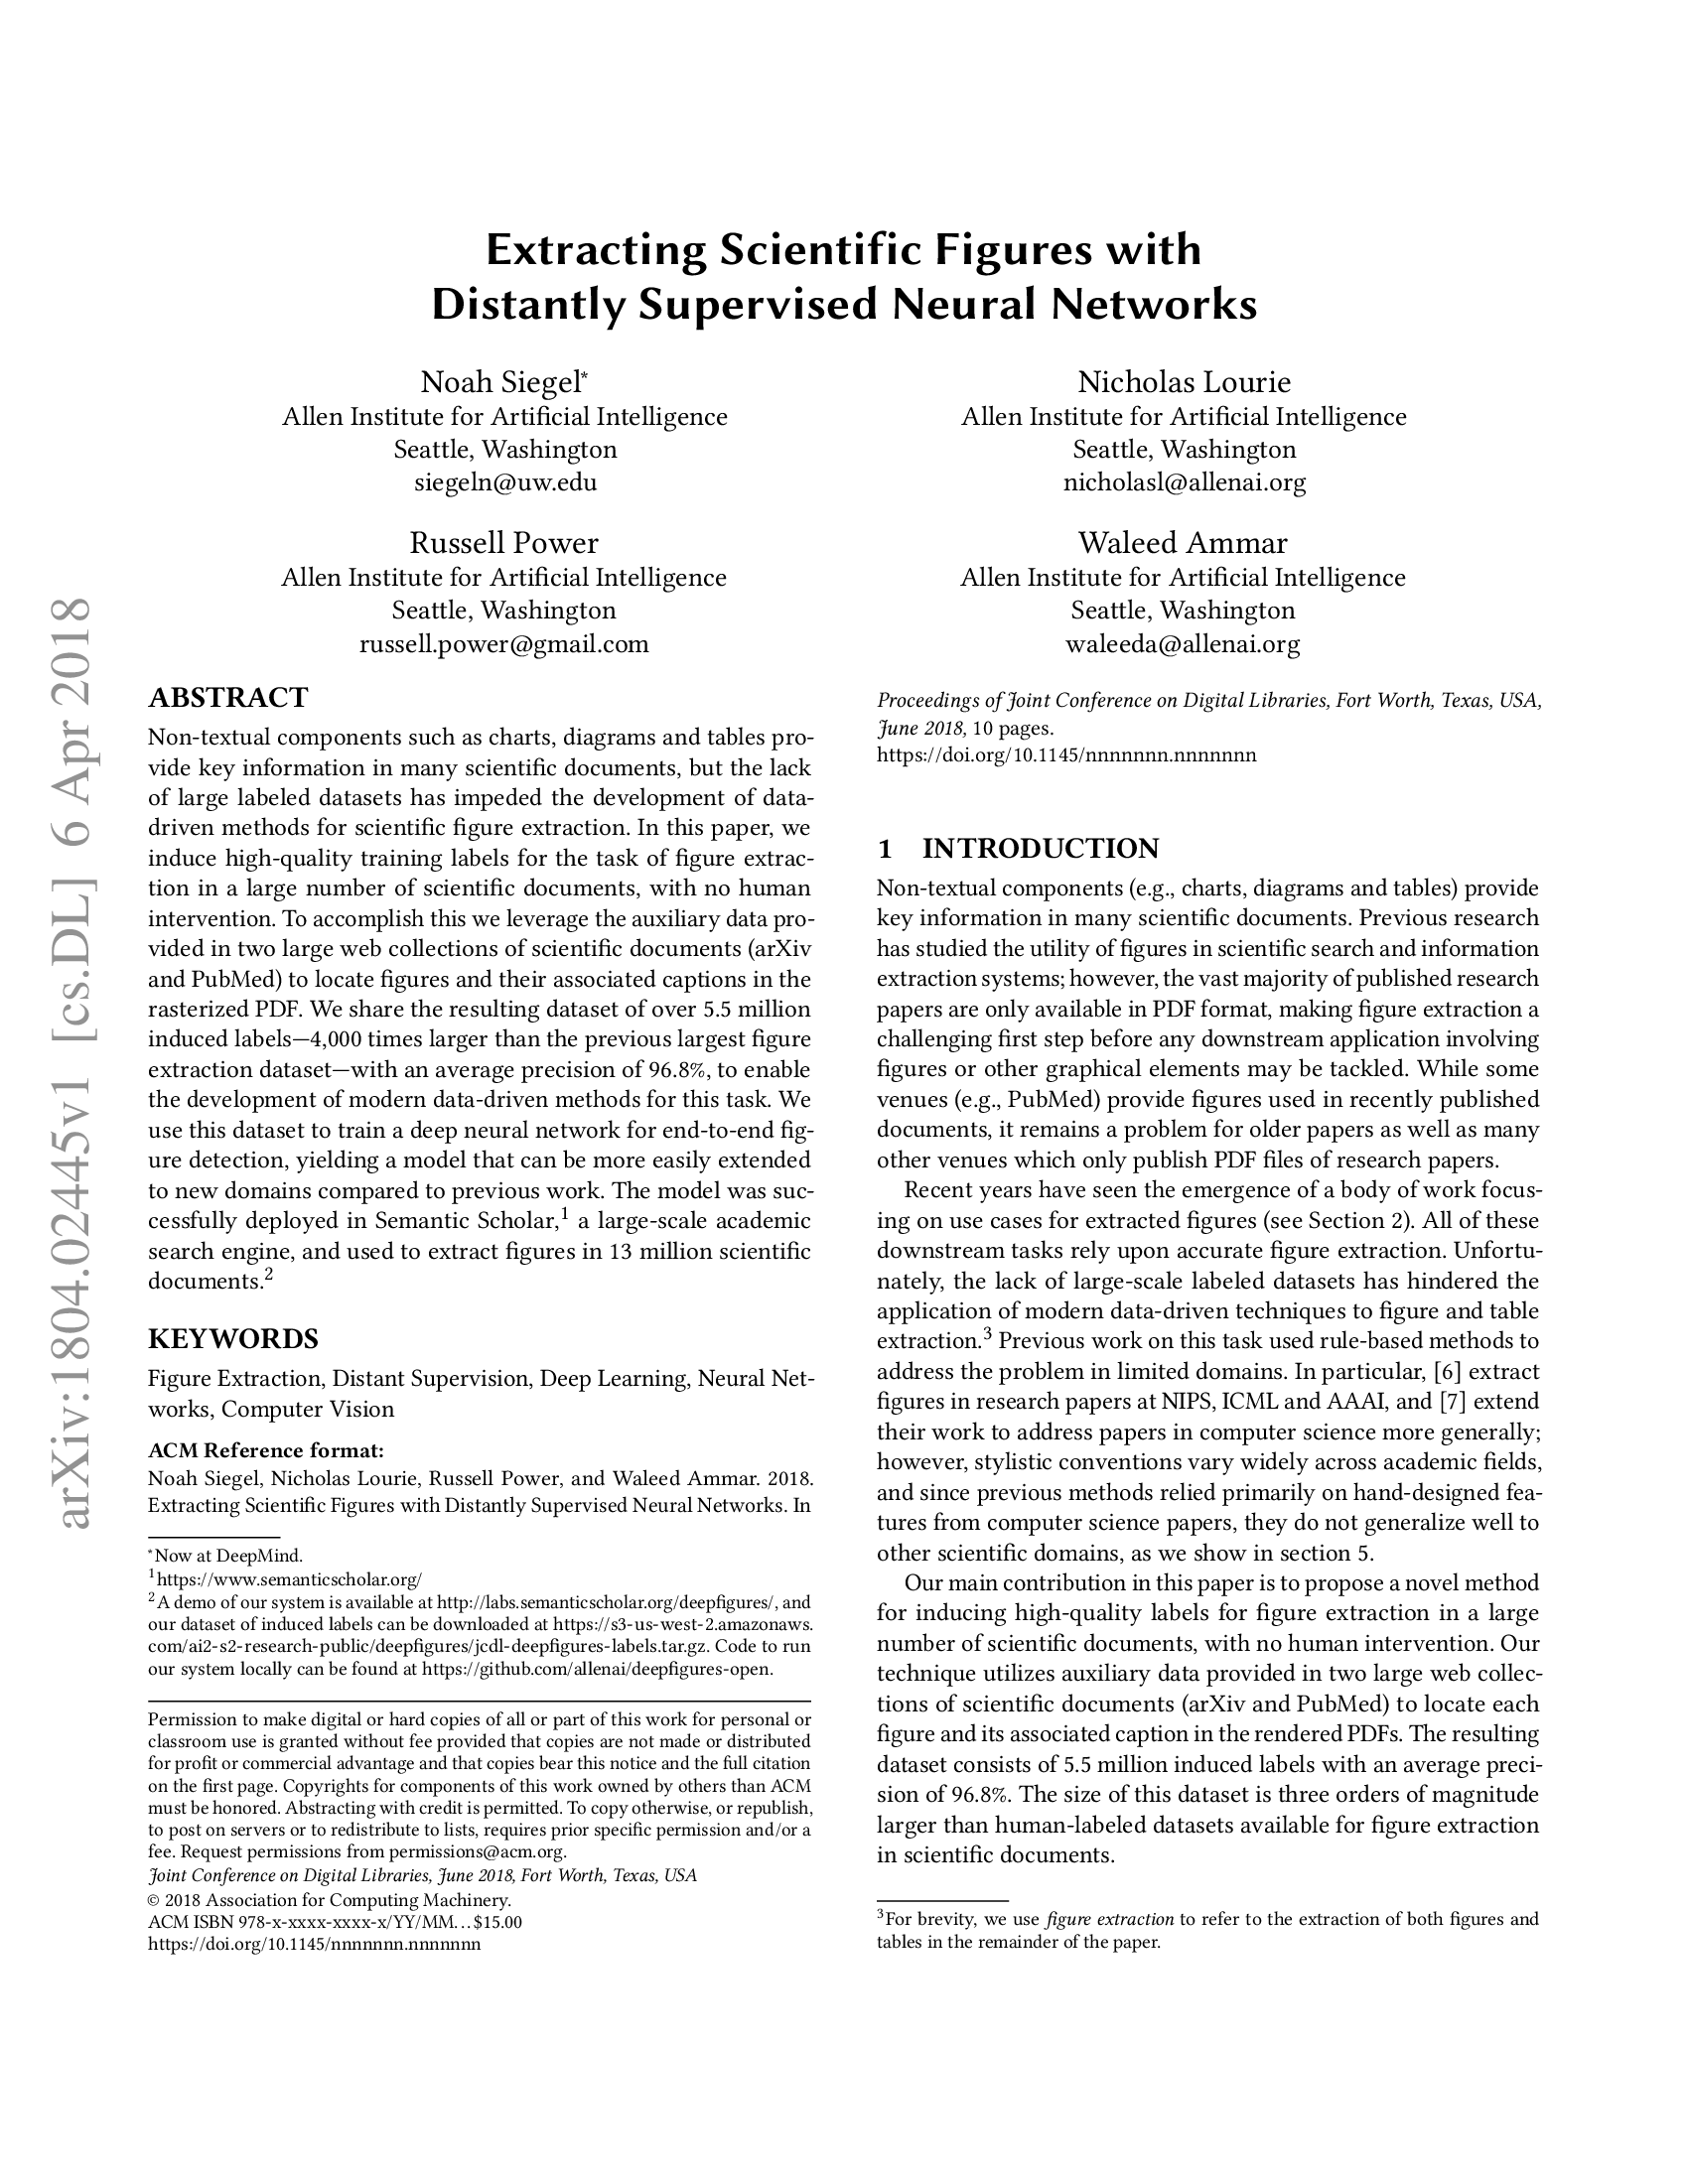 Extracting Scientific Figures with Distantly Supervised Neural Networks